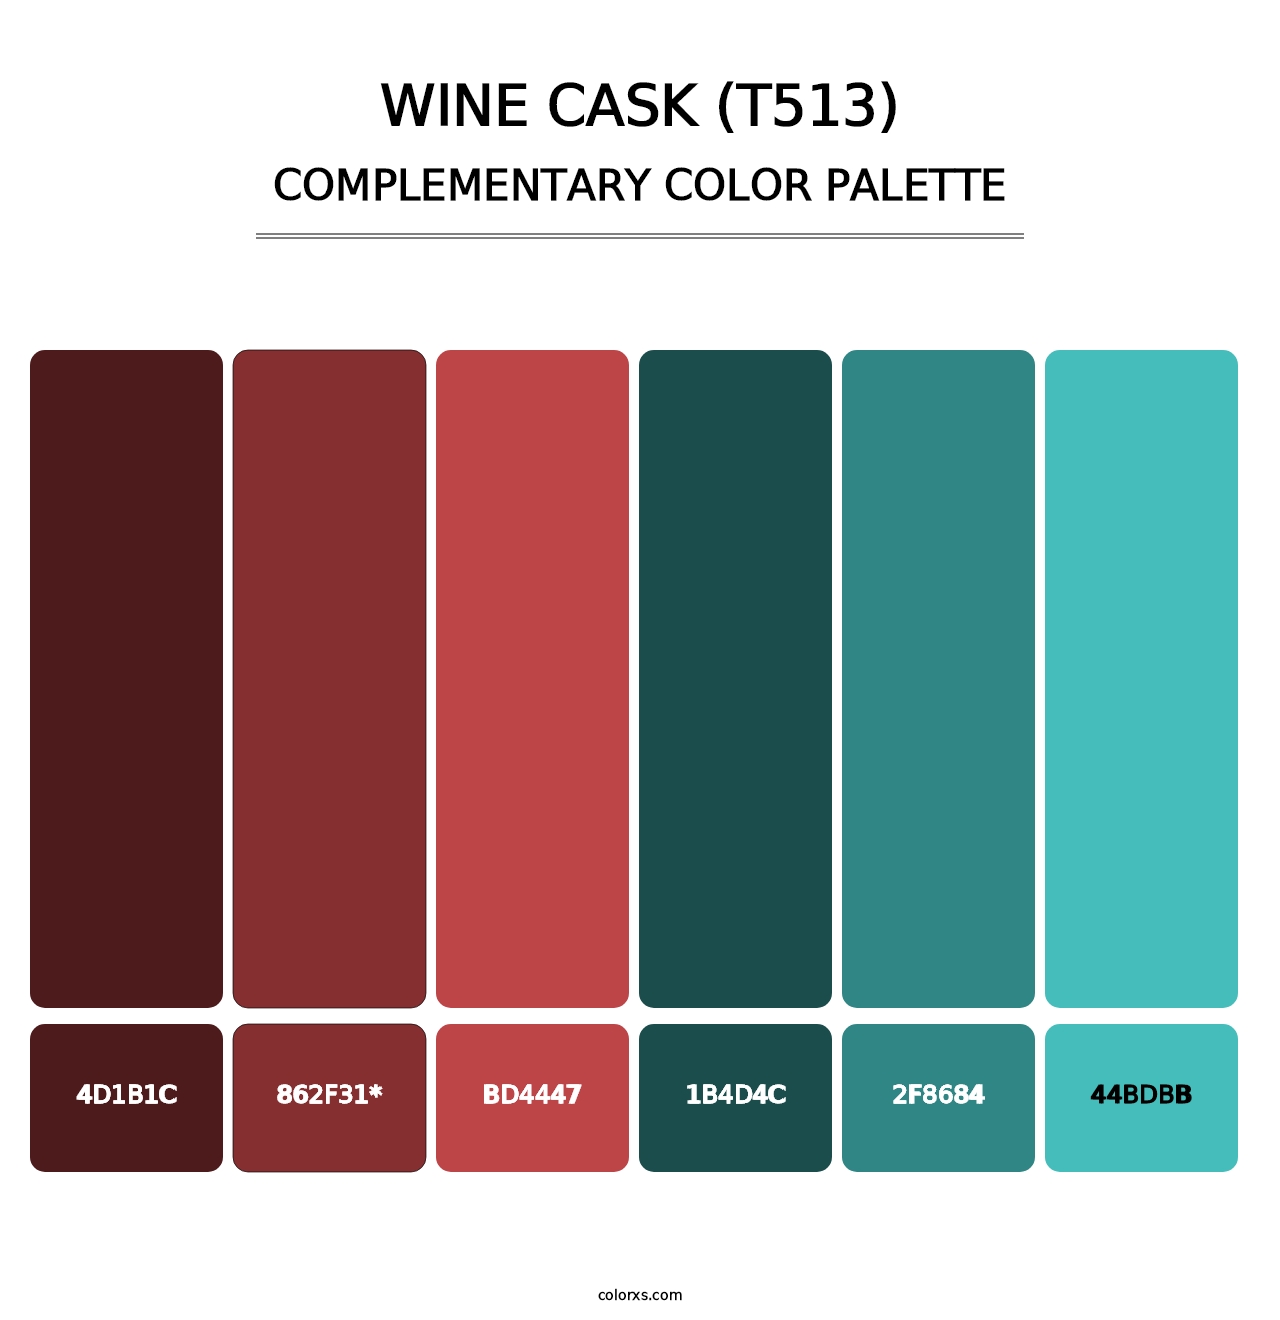 Wine Cask (T513) - Complementary Color Palette